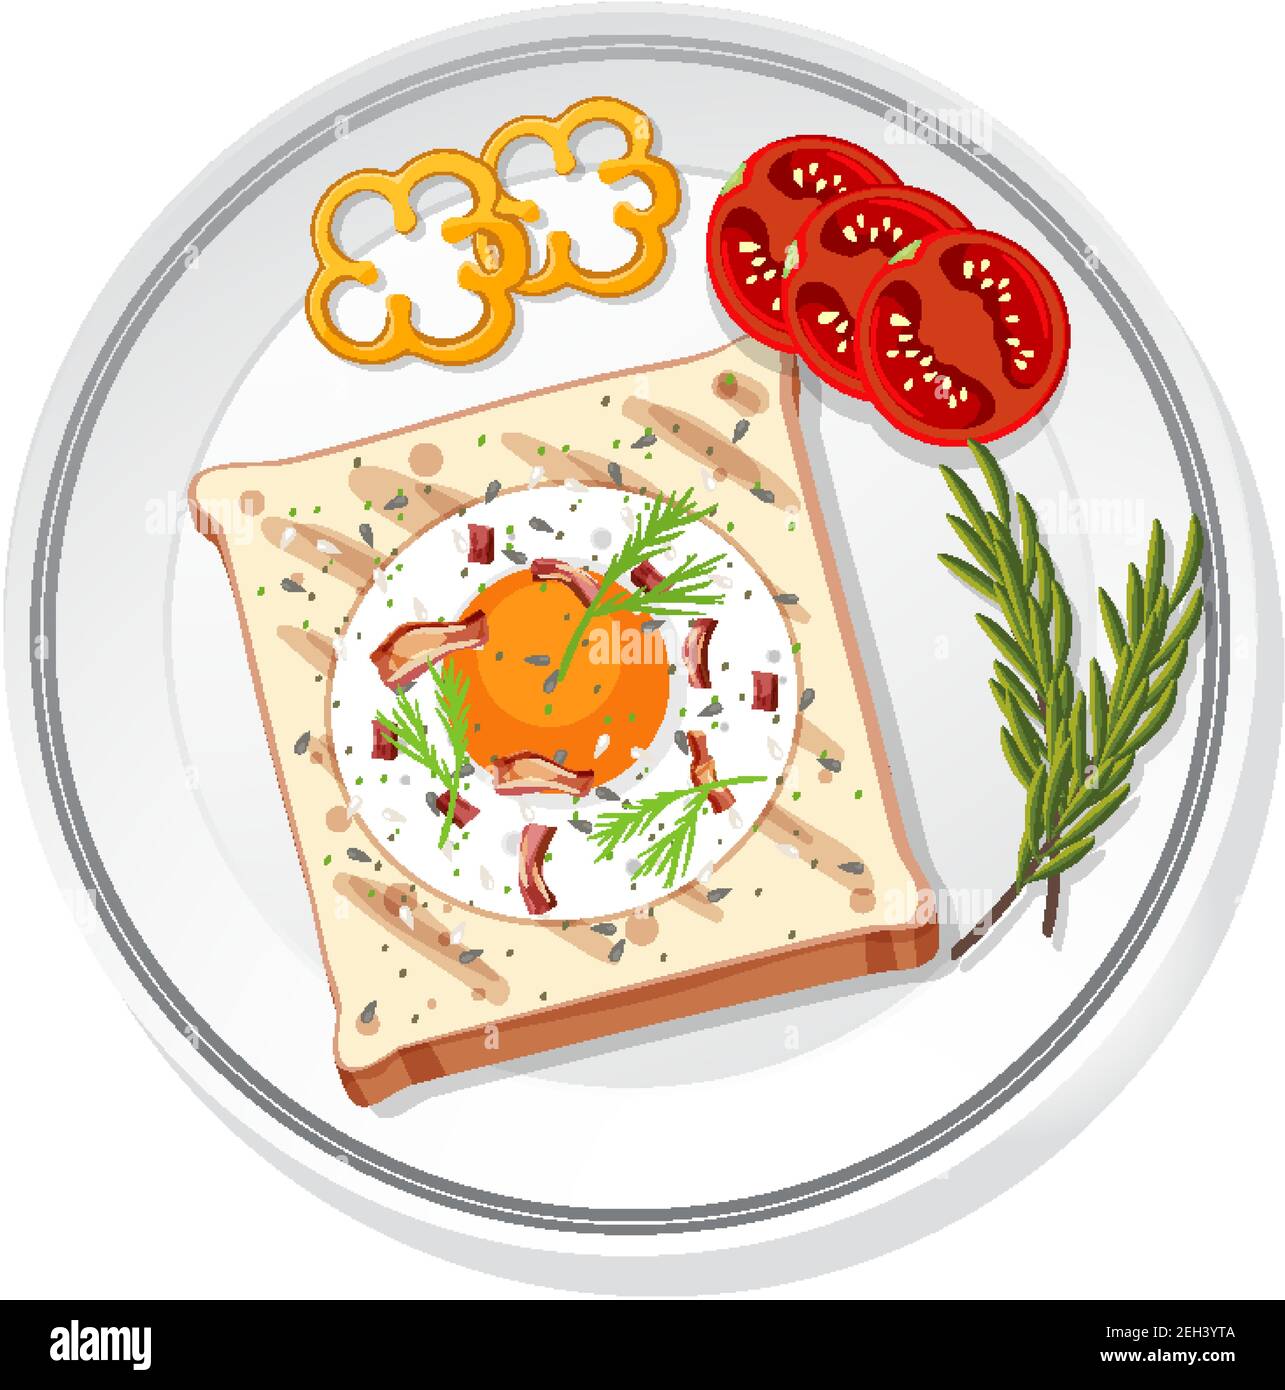 Top view of breakfast set on a dish isolated illustration Stock Vector